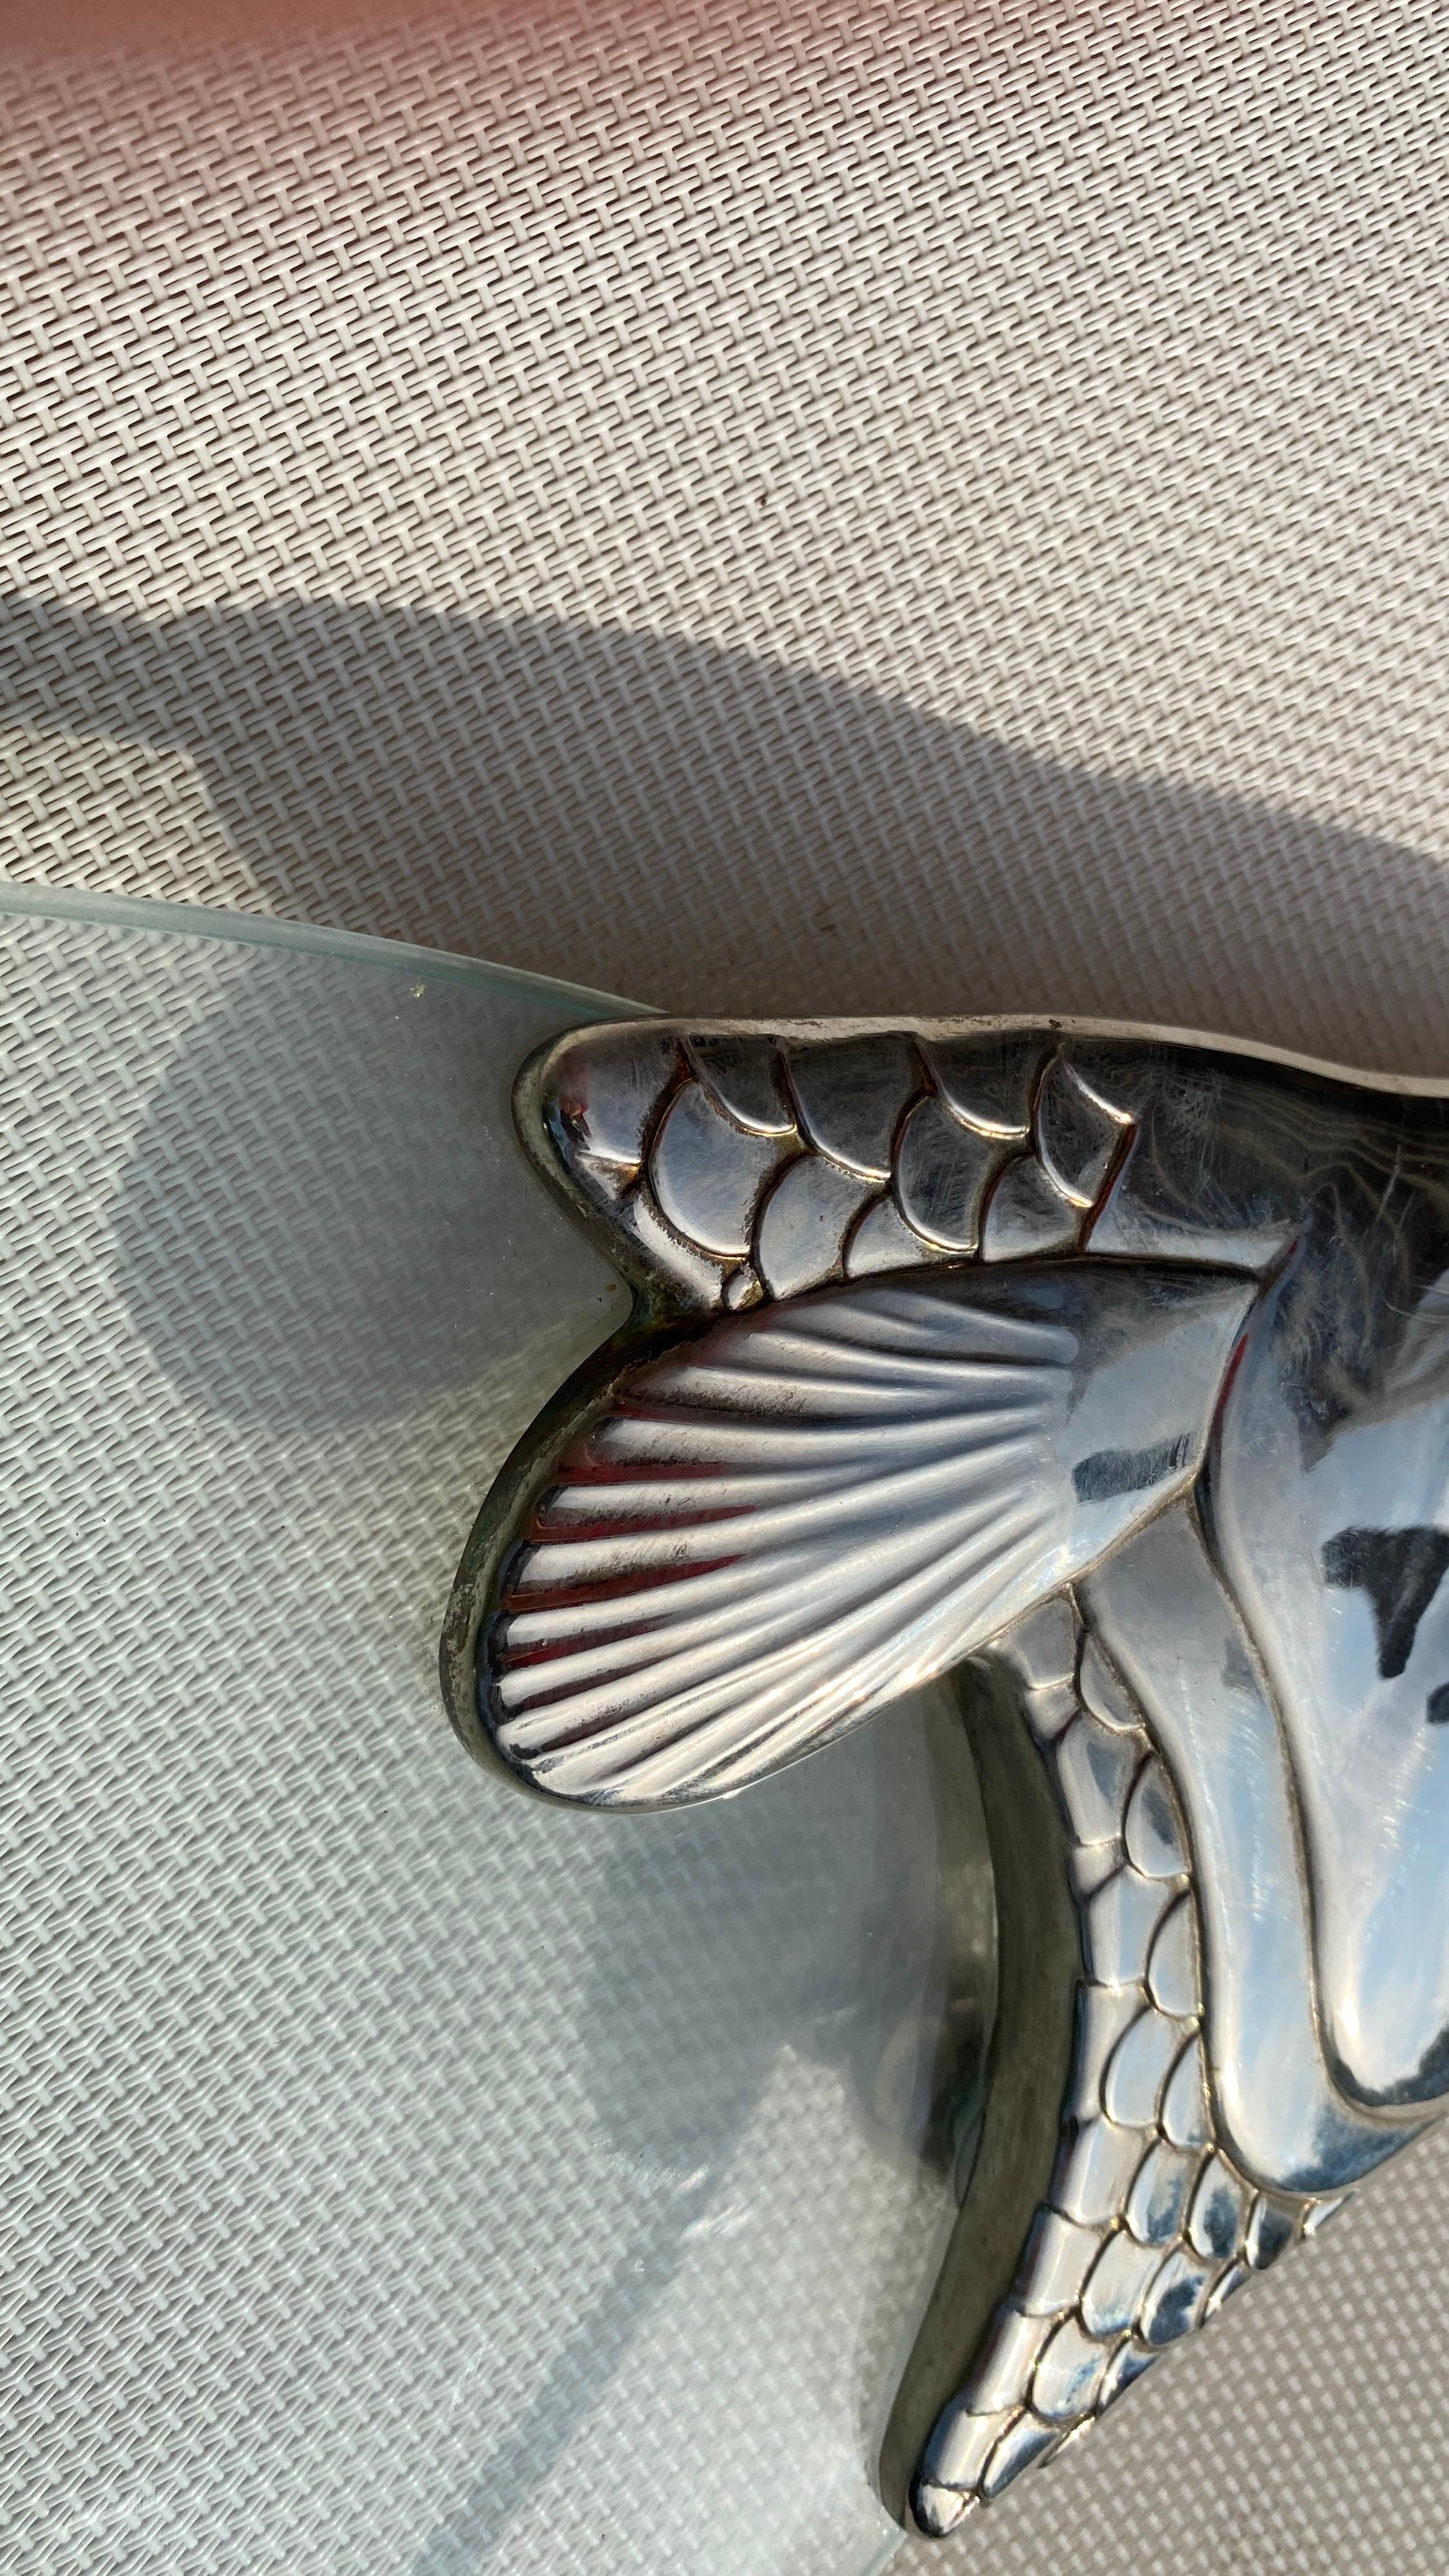 This trivet is a centerpiece in metal and glass. It has been made in France, around 1970.
The pattern is a silver fish shape.